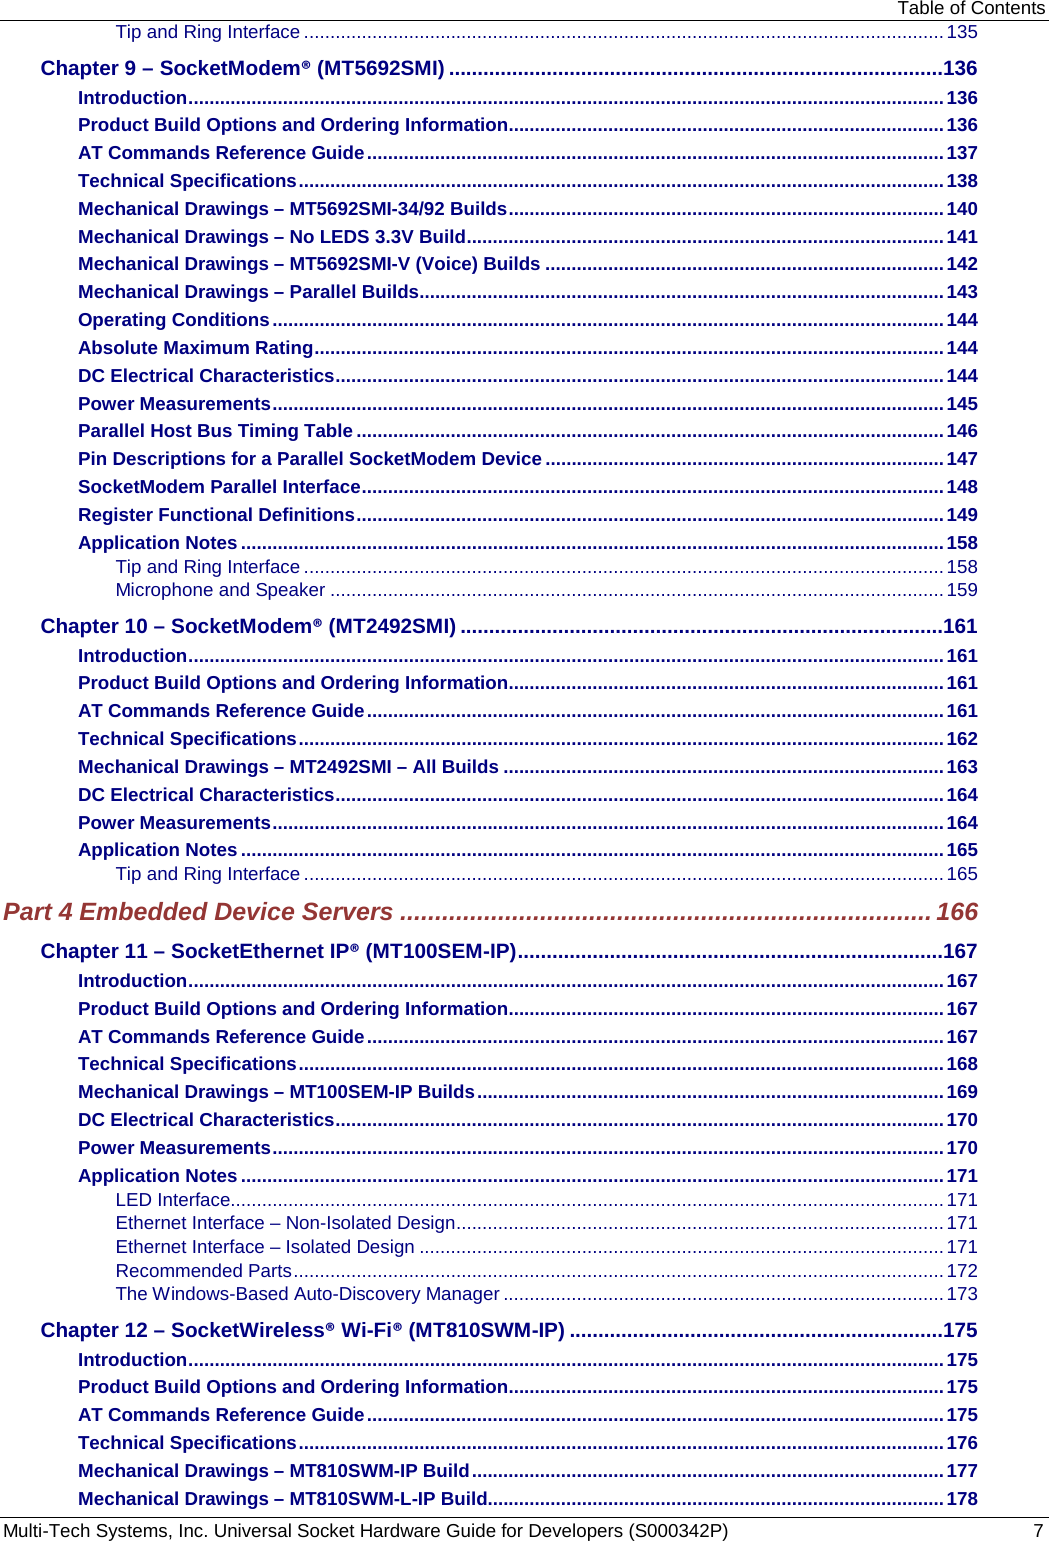 Table of Contents Multi-Tech Systems, Inc. Universal Socket Hardware Guide for Developers (S000342P)  7 Tip and Ring Interface .......................................................................................................................... 135 Chapter 9 – SocketModem® (MT5692SMI) ......................................................................................136 Introduction ................................................................................................................................................ 136 Product Build Options and Ordering Information ................................................................................... 136 AT Commands Reference Guide .............................................................................................................. 137 Technical Specifications ........................................................................................................................... 138 Mechanical Drawings – MT5692SMI-34/92 Builds ................................................................................... 140 Mechanical Drawings – No LEDS 3.3V Build ........................................................................................... 141 Mechanical Drawings – MT5692SMI-V (Voice) Builds ............................................................................ 142 Mechanical Drawings – Parallel Builds .................................................................................................... 143 Operating Conditions ................................................................................................................................ 144 Absolute Maximum Rating ........................................................................................................................ 144 DC Electrical Characteristics .................................................................................................................... 144 Power Measurements ................................................................................................................................ 145 Parallel Host Bus Timing Table ................................................................................................................ 146 Pin Descriptions for a Parallel SocketModem Device ............................................................................ 147 SocketModem Parallel Interface ............................................................................................................... 148 Register Functional Definitions ................................................................................................................ 149 Application Notes ...................................................................................................................................... 158 Tip and Ring Interface .......................................................................................................................... 158 Microphone and Speaker ..................................................................................................................... 159 Chapter 10 – SocketModem® (MT2492SMI) ....................................................................................161 Introduction ................................................................................................................................................ 161 Product Build Options and Ordering Information ................................................................................... 161 AT Commands Reference Guide .............................................................................................................. 161 Technical Specifications ........................................................................................................................... 162 Mechanical Drawings – MT2492SMI – All Builds .................................................................................... 163 DC Electrical Characteristics .................................................................................................................... 164 Power Measurements ................................................................................................................................ 164 Application Notes ...................................................................................................................................... 165 Tip and Ring Interface .......................................................................................................................... 165 Part 4 Embedded Device Servers ............................................................................ 166 Chapter 11 – SocketEthernet IP® (MT100SEM-IP) ..........................................................................167 Introduction ................................................................................................................................................ 167 Product Build Options and Ordering Information ................................................................................... 167 AT Commands Reference Guide .............................................................................................................. 167 Technical Specifications ........................................................................................................................... 168 Mechanical Drawings – MT100SEM-IP Builds ......................................................................................... 169 DC Electrical Characteristics .................................................................................................................... 170 Power Measurements ................................................................................................................................ 170 Application Notes ...................................................................................................................................... 171 LED Interface........................................................................................................................................ 171 Ethernet Interface – Non-Isolated Design ............................................................................................. 171 Ethernet Interface – Isolated Design .................................................................................................... 171 Recommended Parts ............................................................................................................................ 172 The Windows-Based Auto-Discovery Manager .................................................................................... 173 Chapter 12 – SocketWireless® Wi-Fi® (MT810SWM-IP) .................................................................175 Introduction ................................................................................................................................................ 175 Product Build Options and Ordering Information ................................................................................... 175 AT Commands Reference Guide .............................................................................................................. 175 Technical Specifications ........................................................................................................................... 176 Mechanical Drawings – MT810SWM-IP Build .......................................................................................... 177 Mechanical Drawings – MT810SWM-L-IP Build....................................................................................... 178 